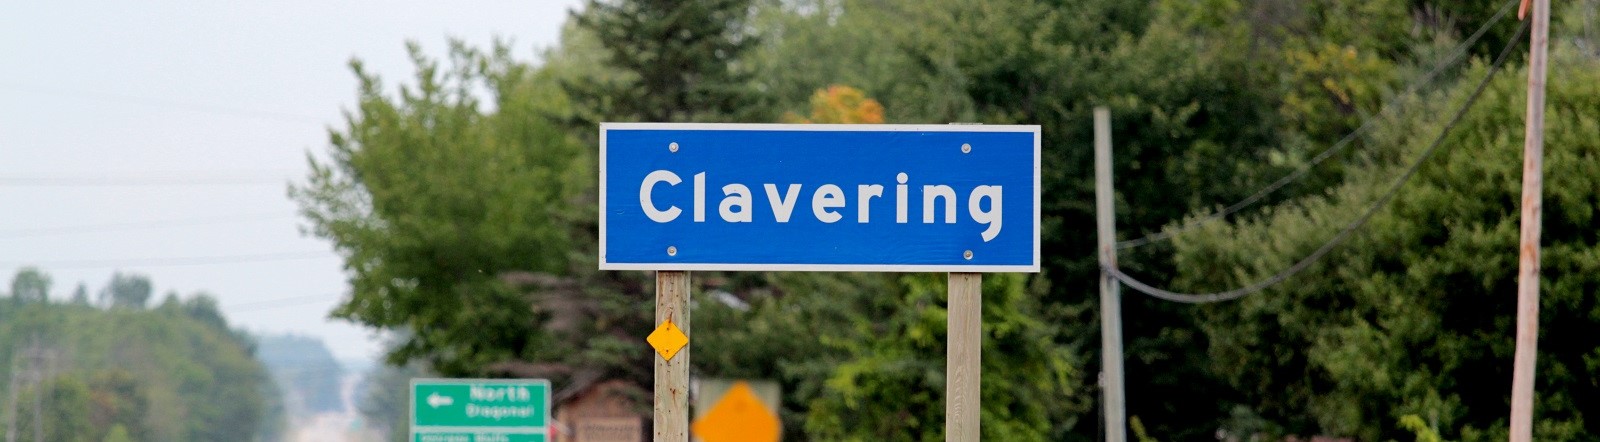 Photo of Clavering sign